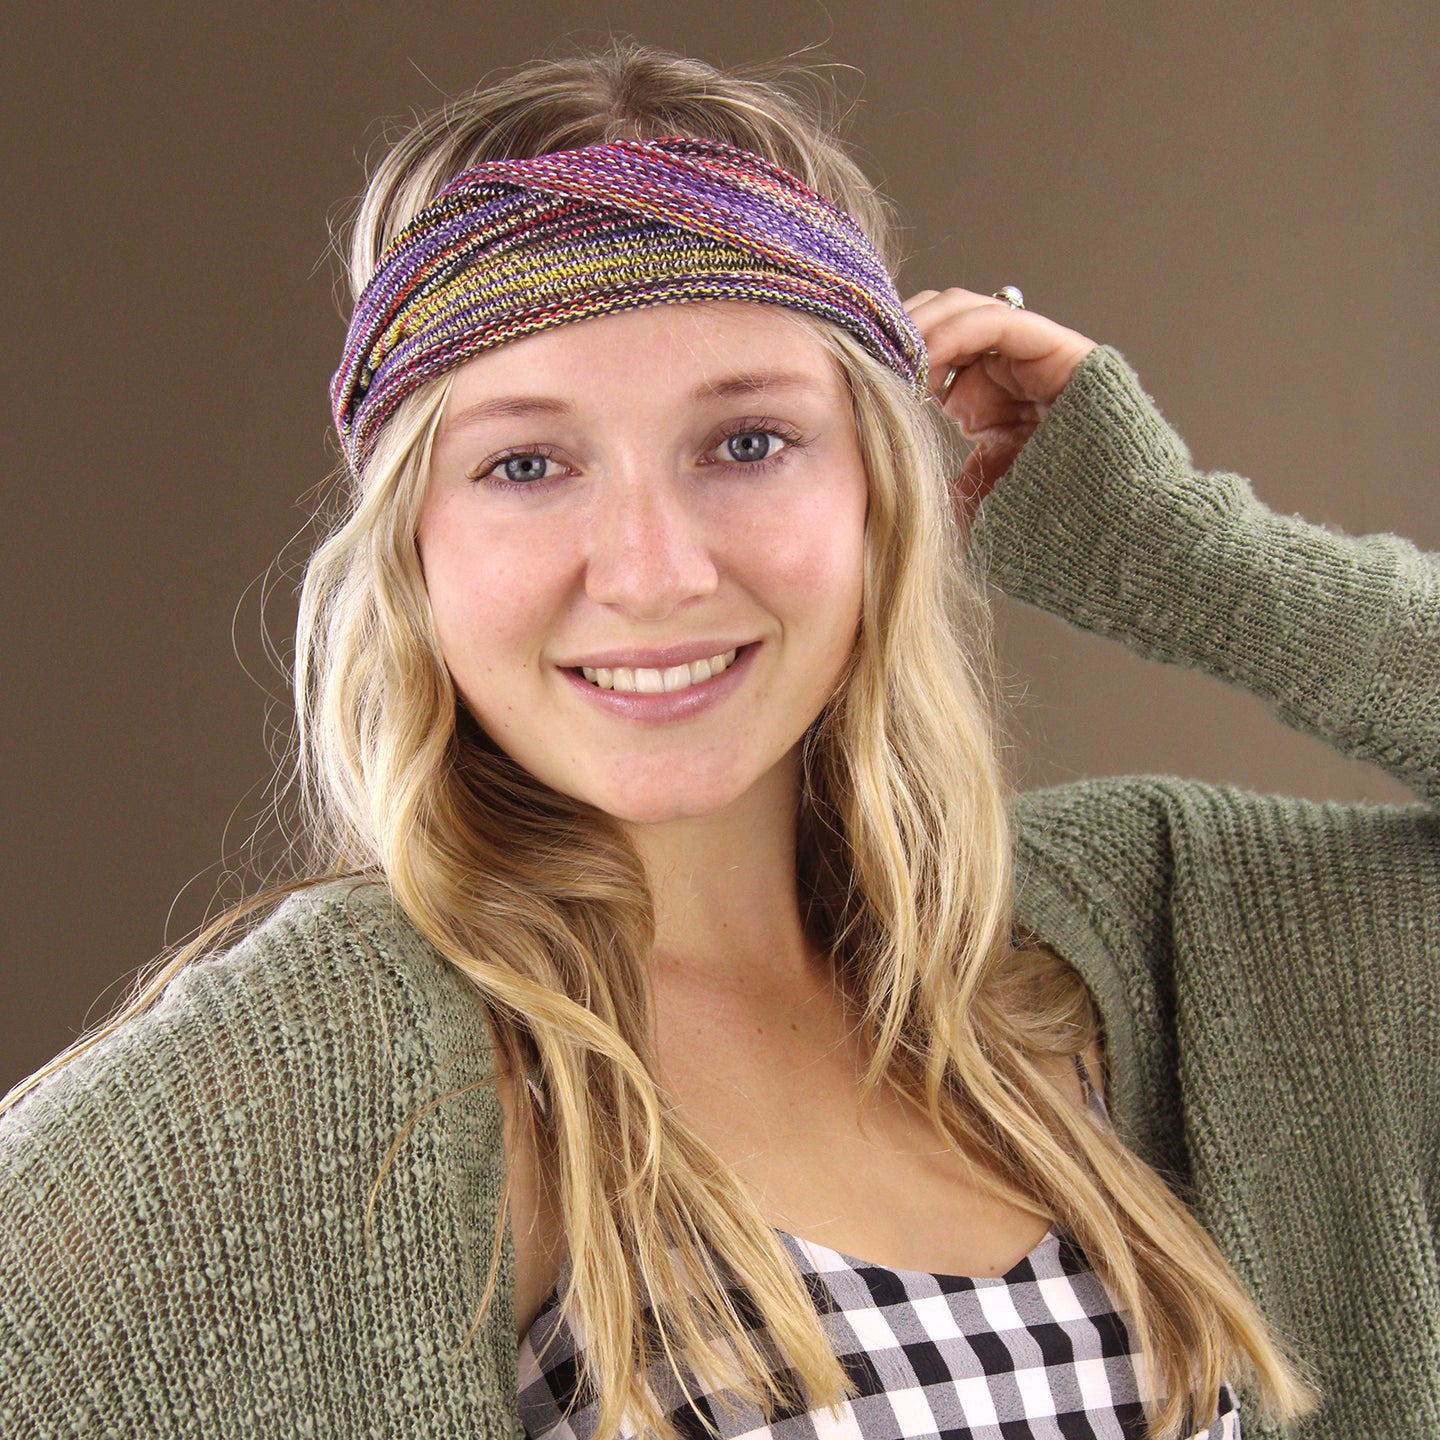 Nepalese Extra-Wide Stretchy Headband Purple Red Black